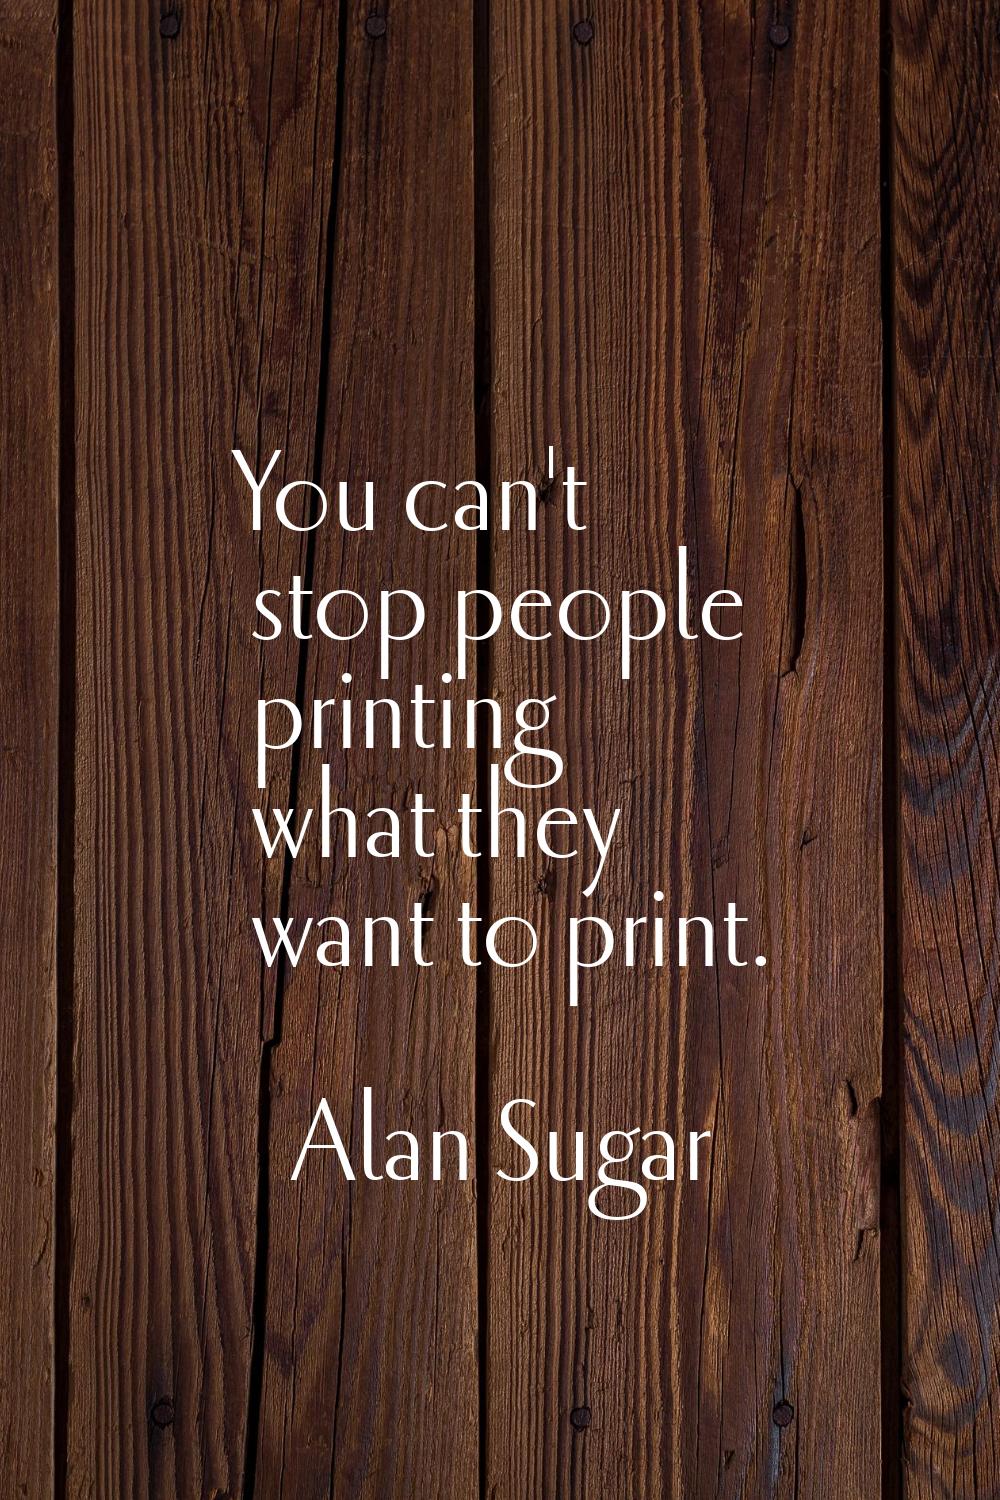 You can't stop people printing what they want to print.